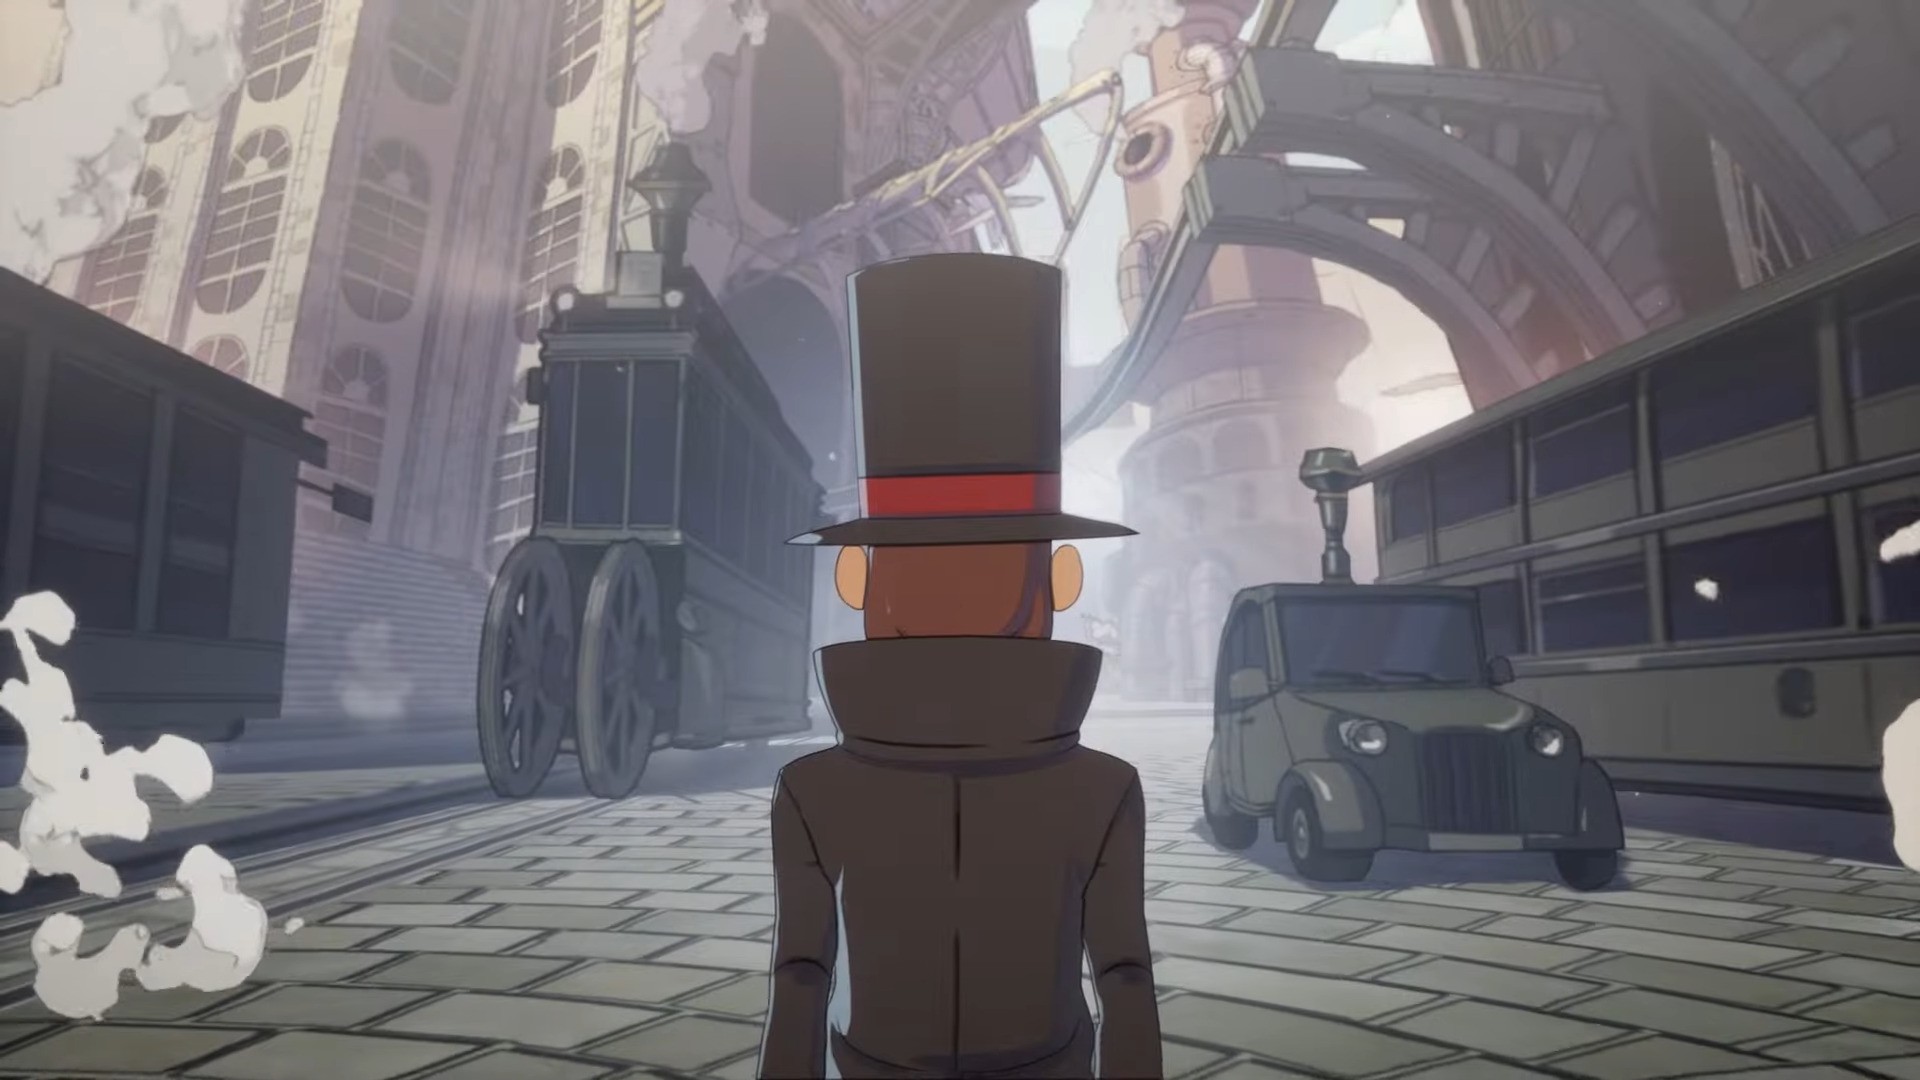 Professor Layton and the New World of Steam aims for 2025